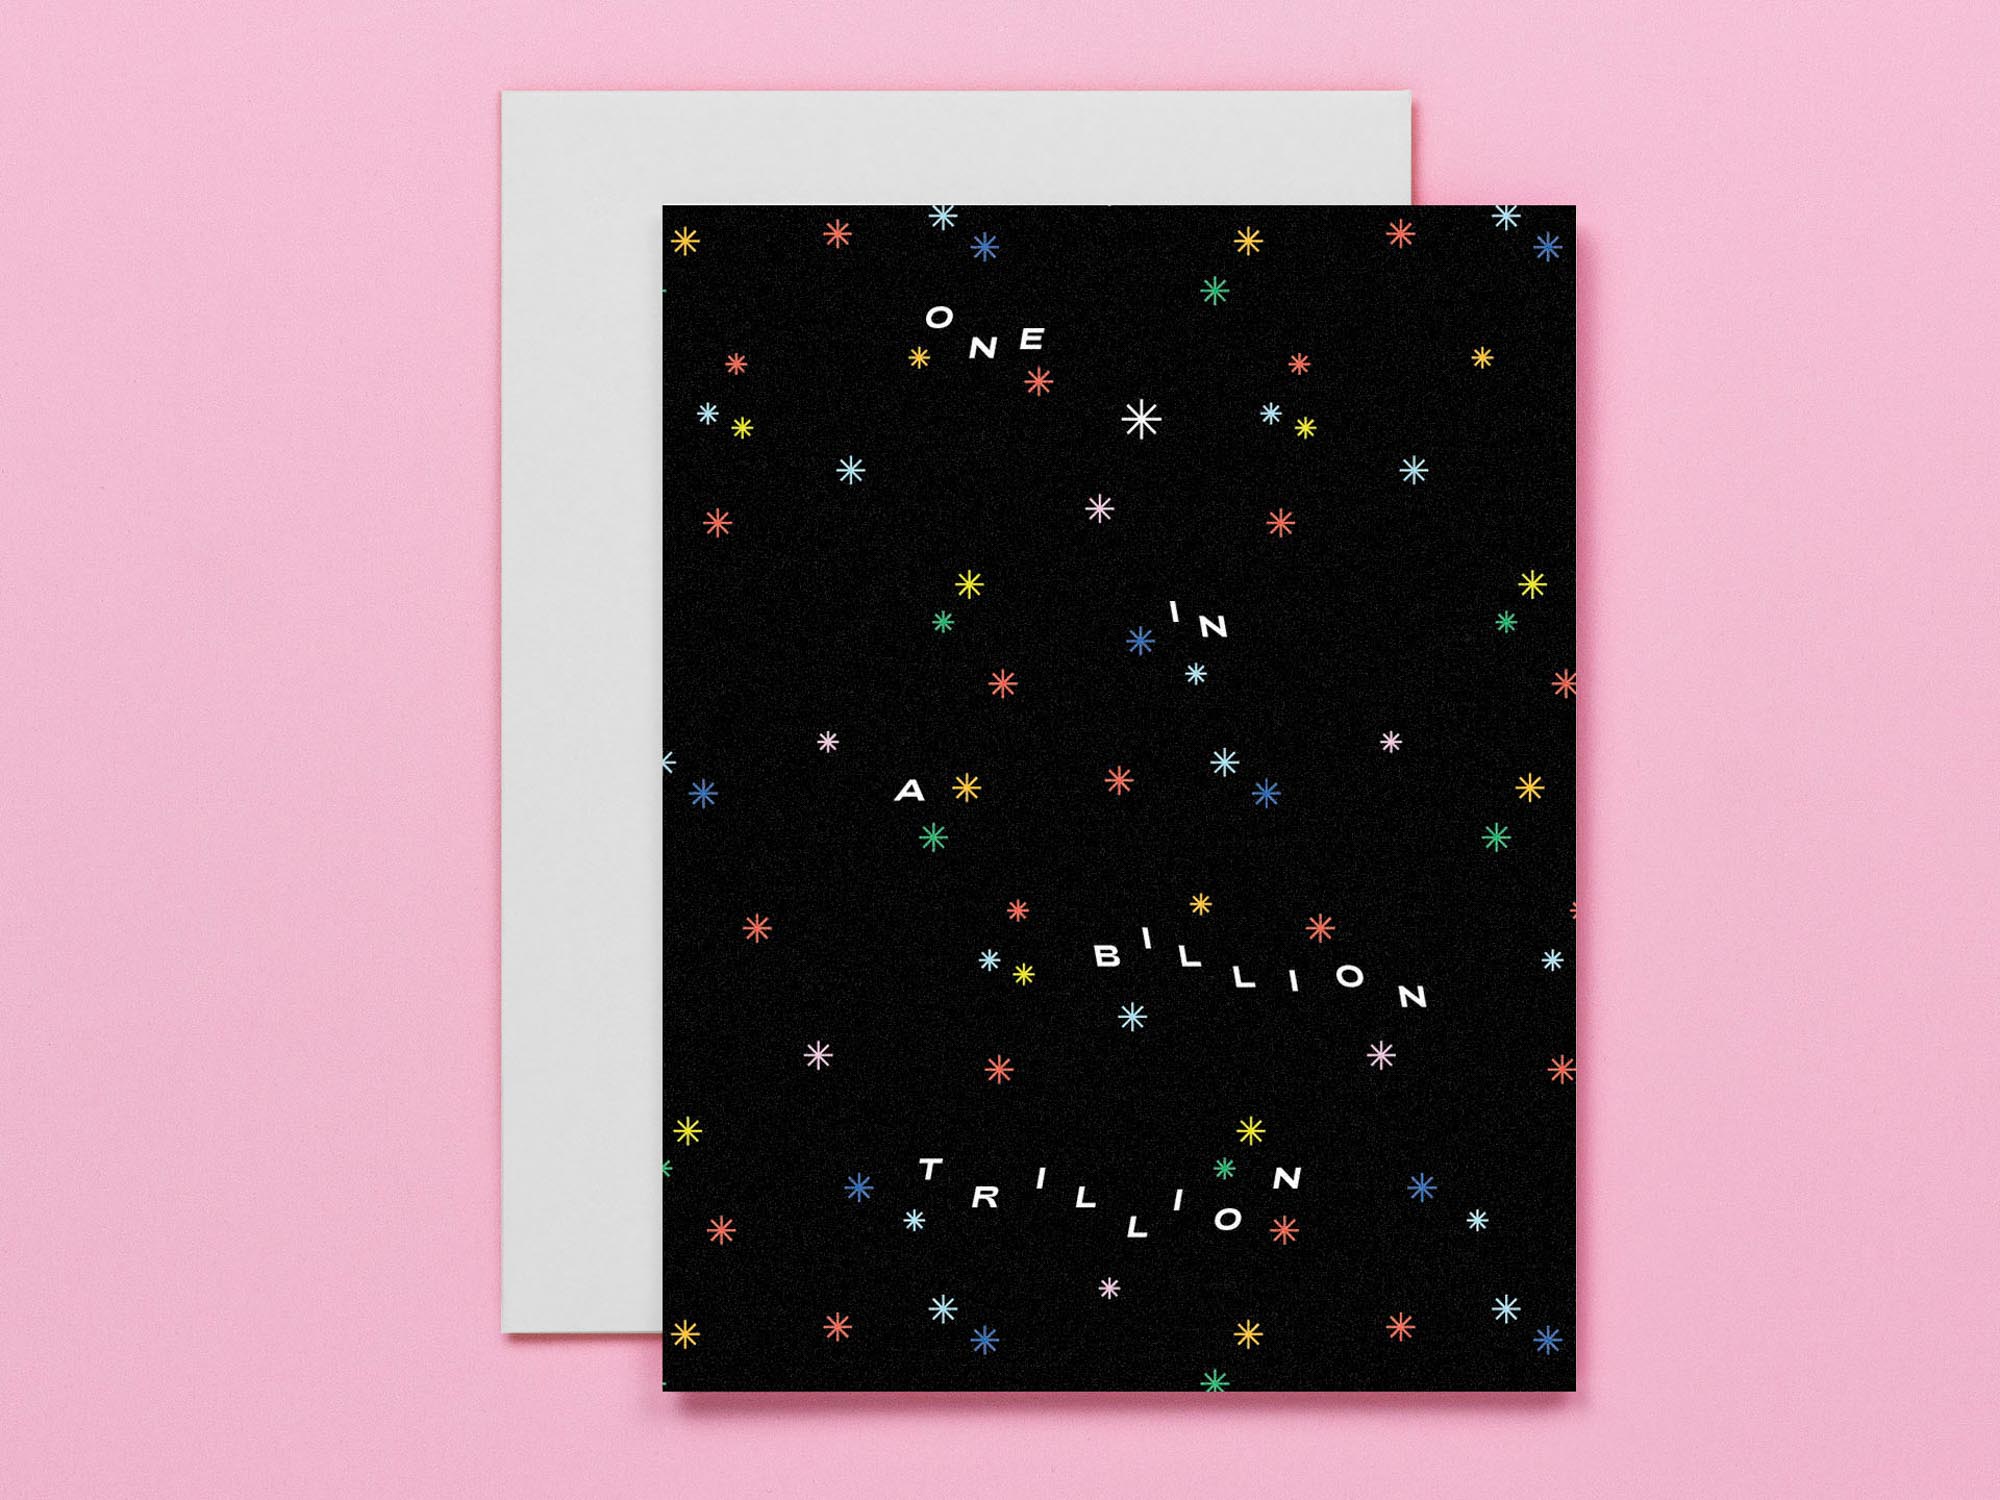 "One in a billion trillion" thank you card or friendship card with rainbow midcentury stars design. Made in USA by @mydarlin_bk